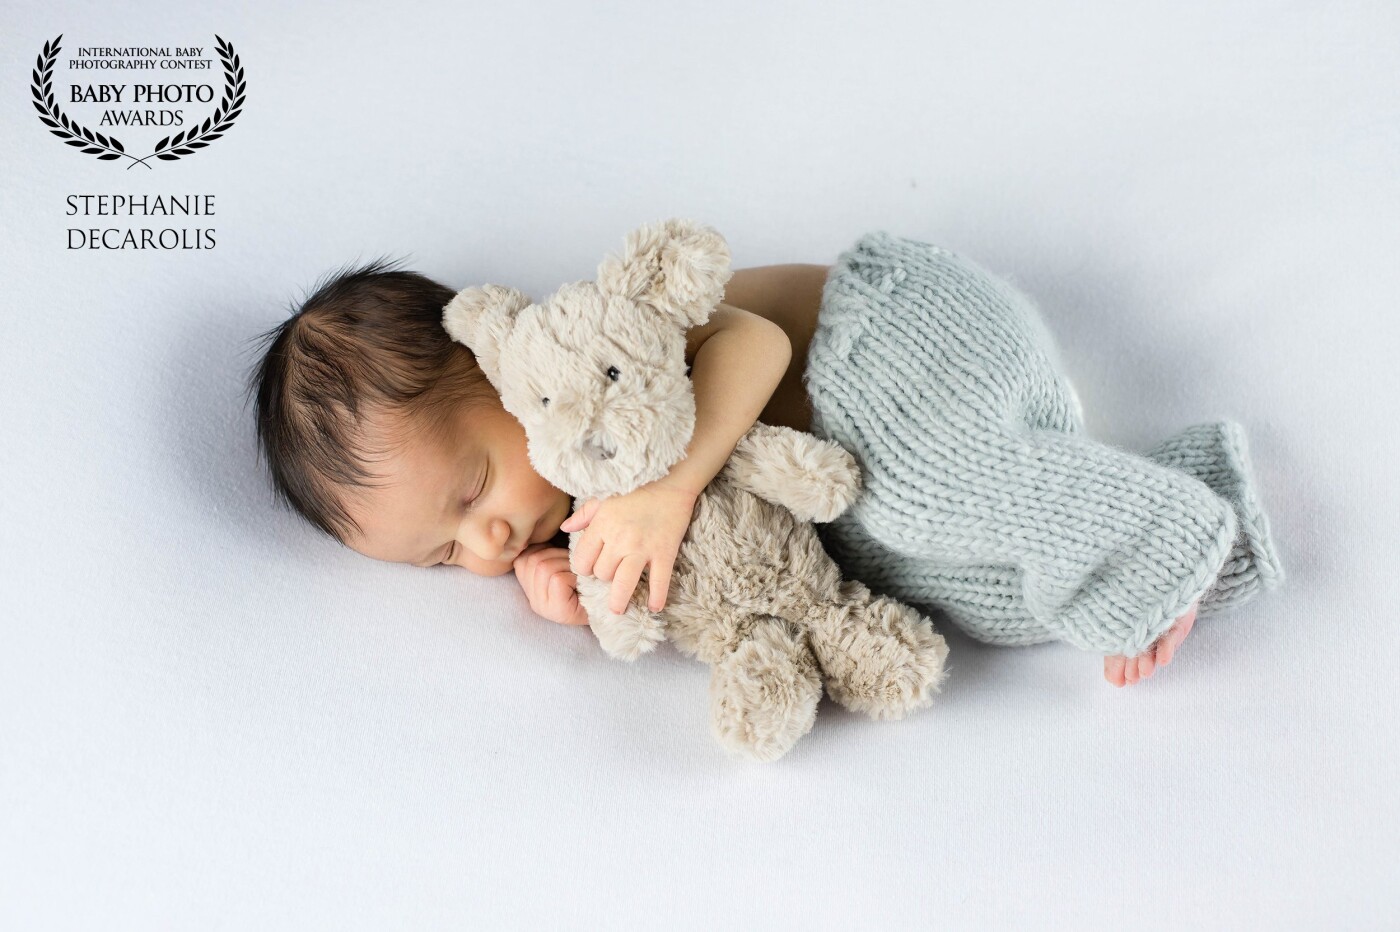 Meet Connor: He was only 6 days new when this photo was taken, and he’s just as sweet as could be! He LOVED snuggling with his little teddy bear. 